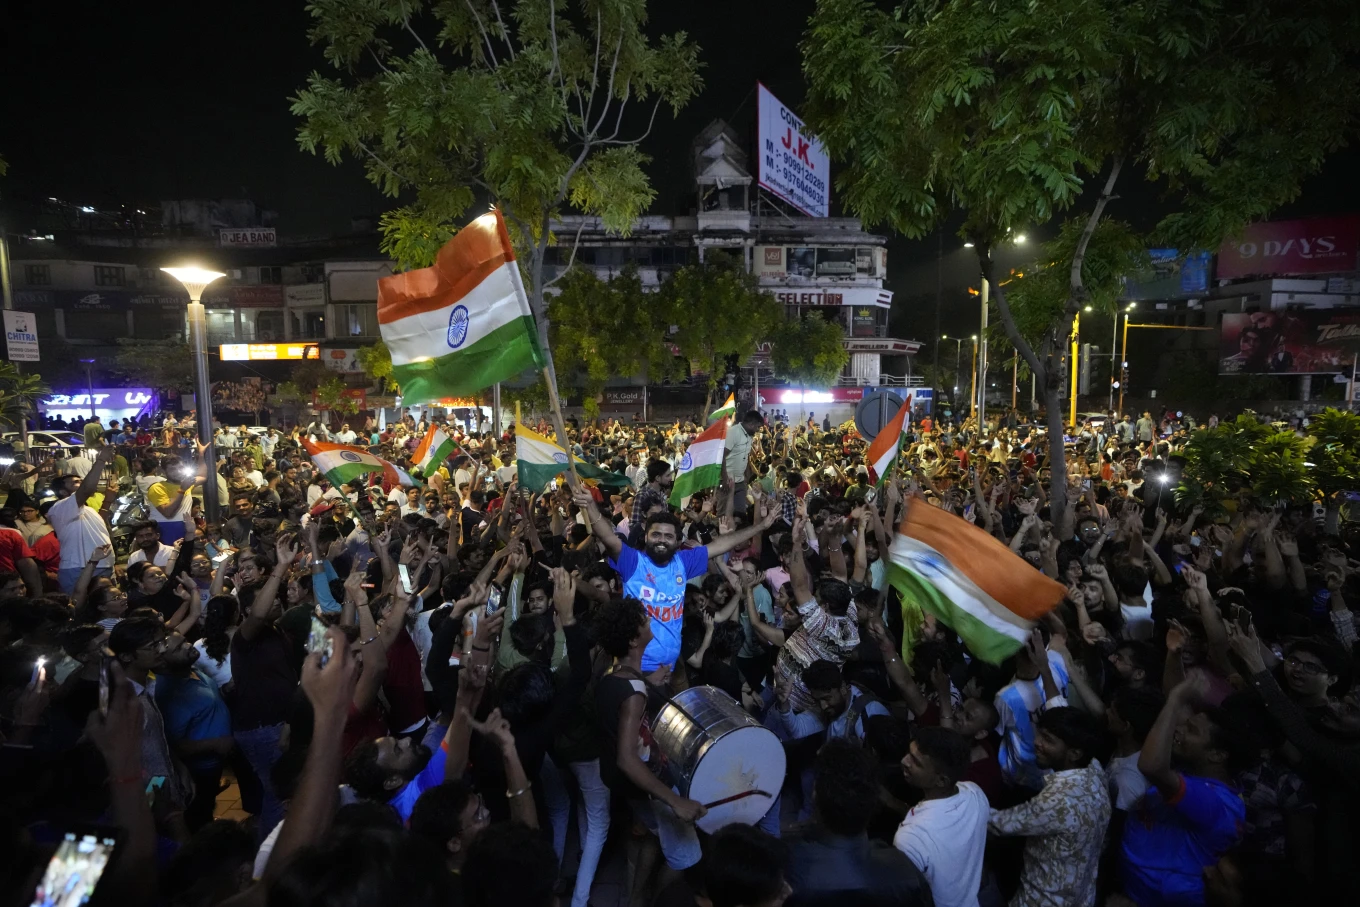 India Triumphs: Celebrations and Unity as T20 World Cup Returns Home